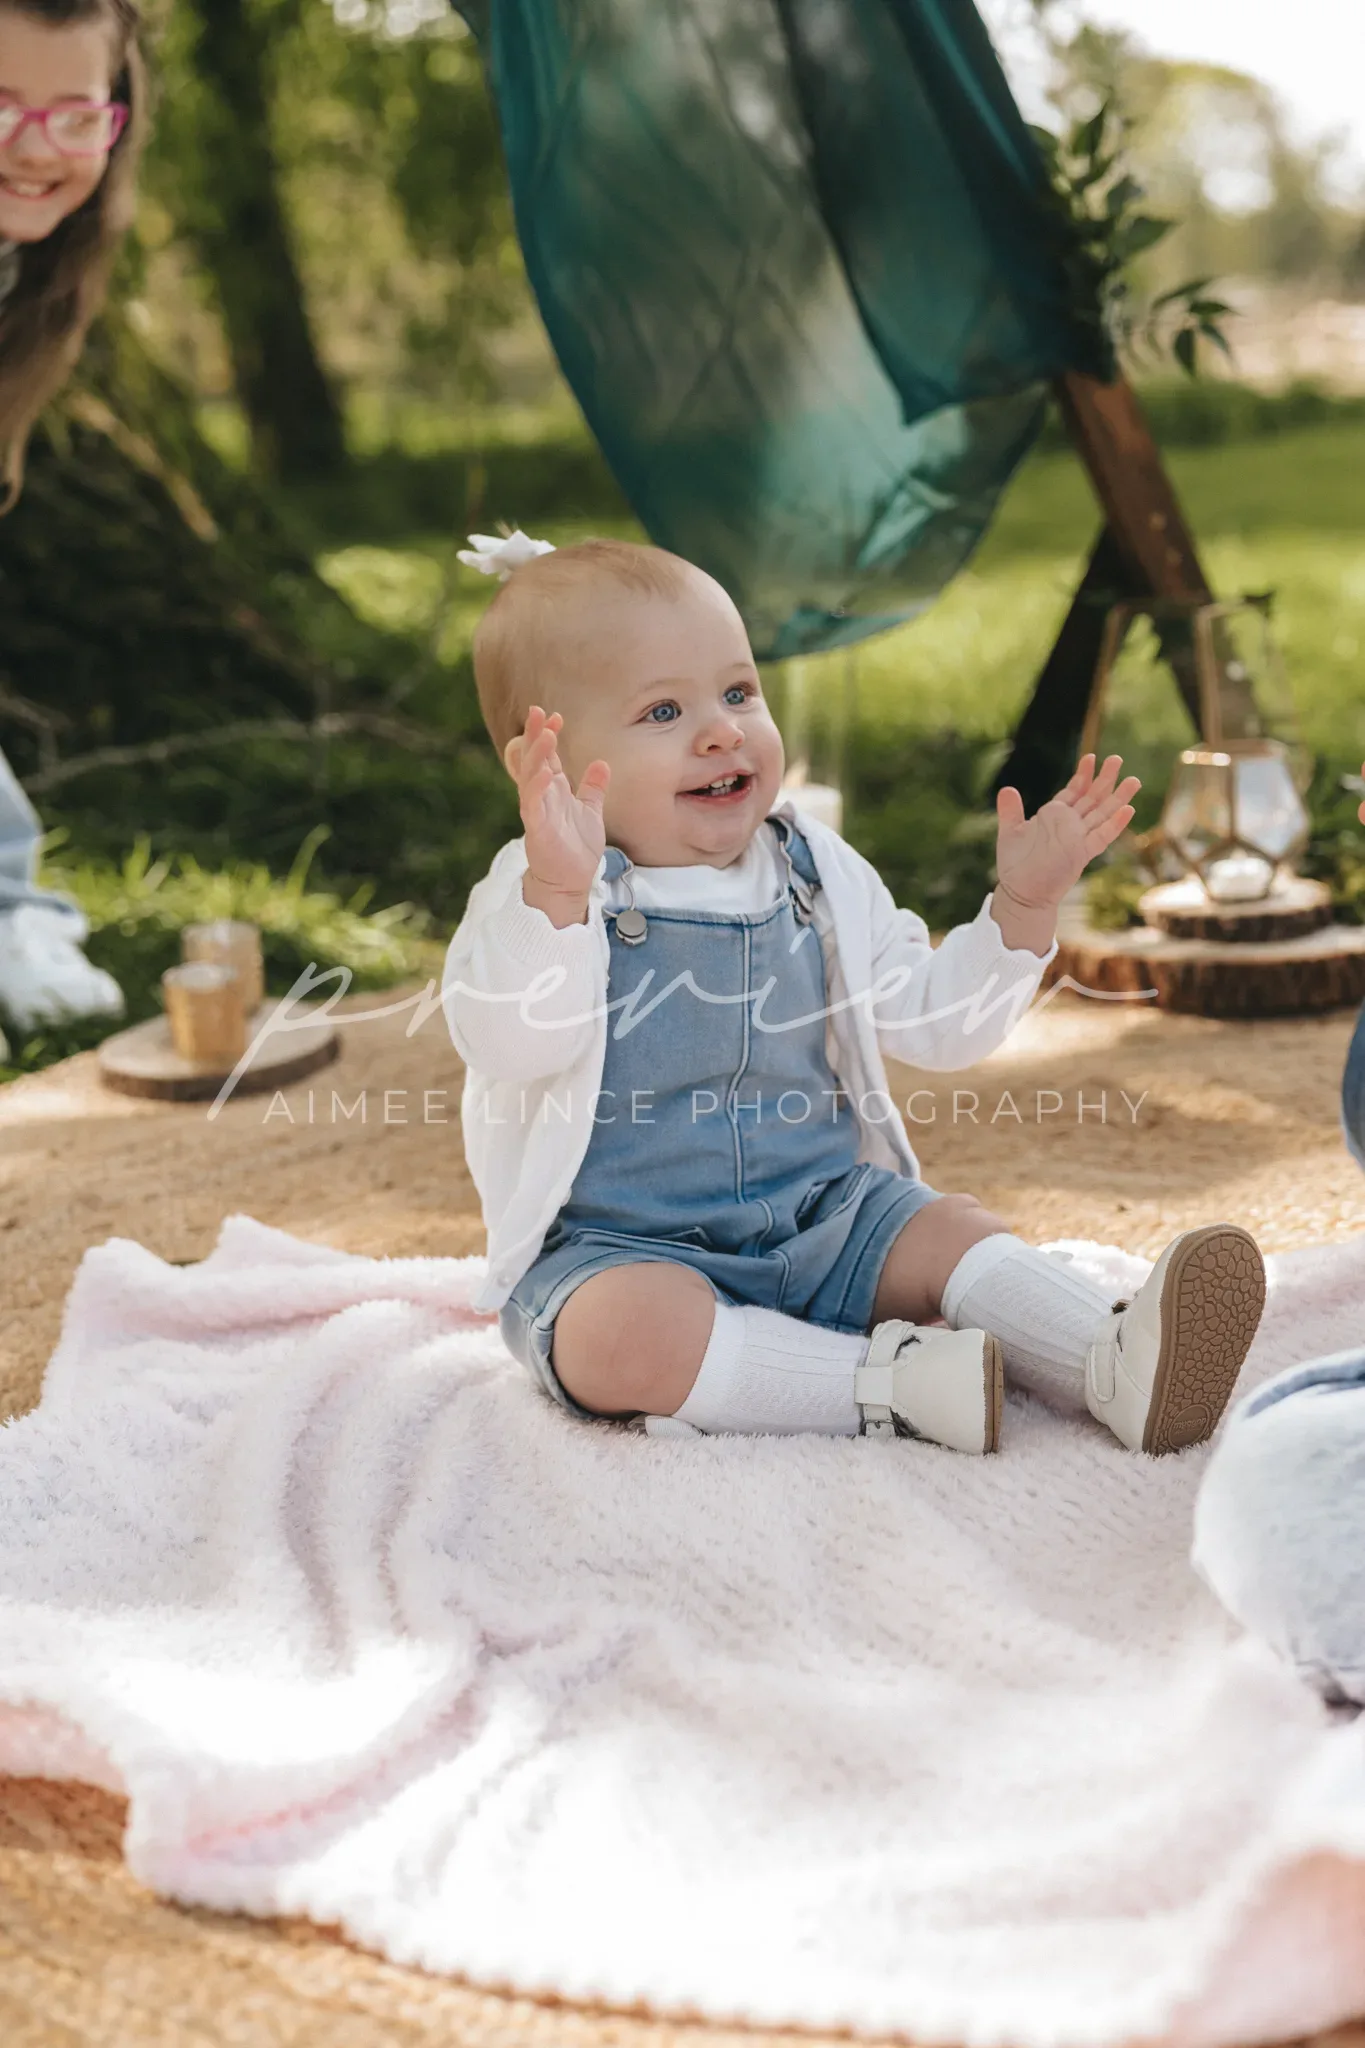 A joyful baby sits on a blanket, clapping hands, wearing a denim dungaree and white shoes. a smiling woman is partially visible in the background. soft, natural lighting enhances the serene outdoor setting with greenery.